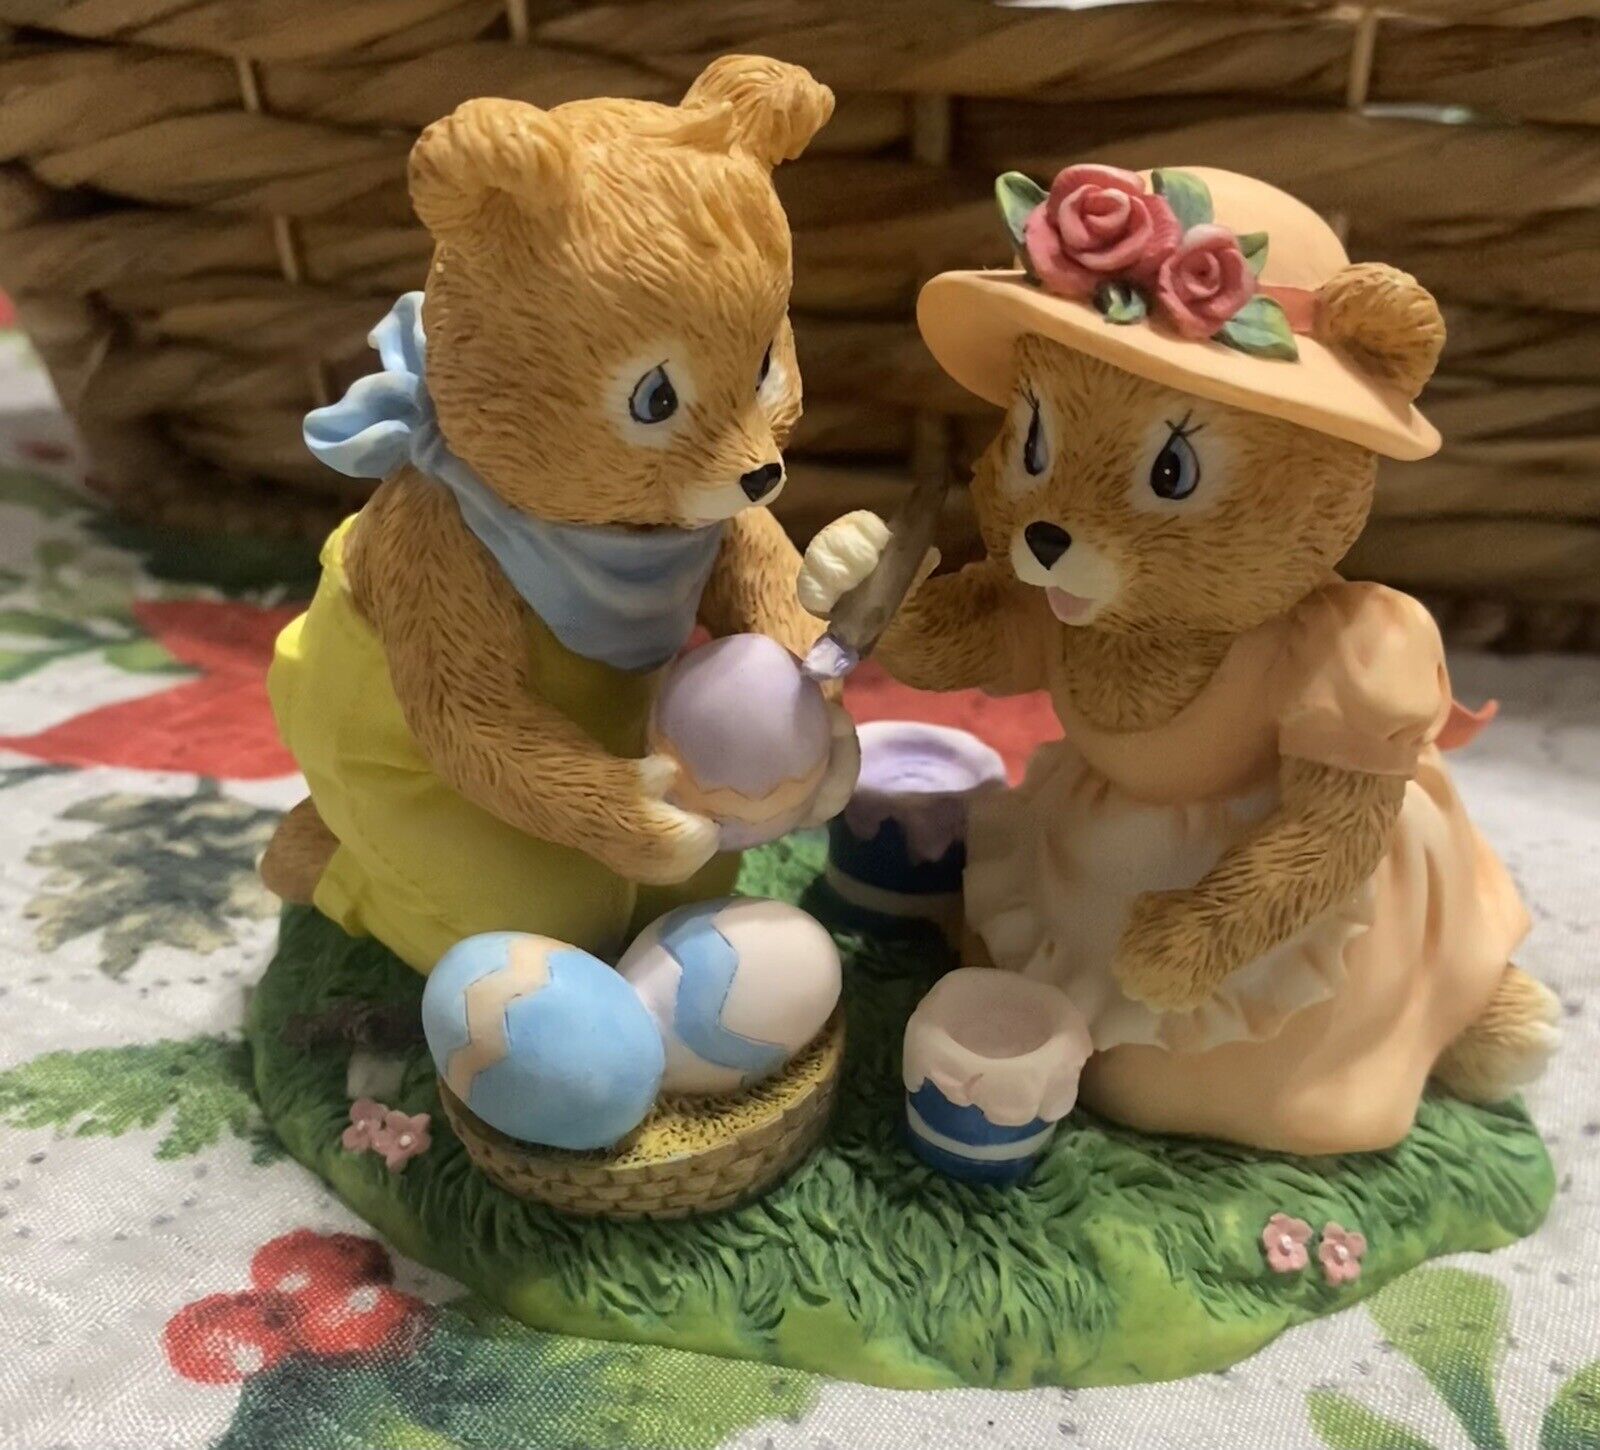 Vintage 1998 Bears Easter Figurine Painting Eggs Rare Spring Special Edition 4”